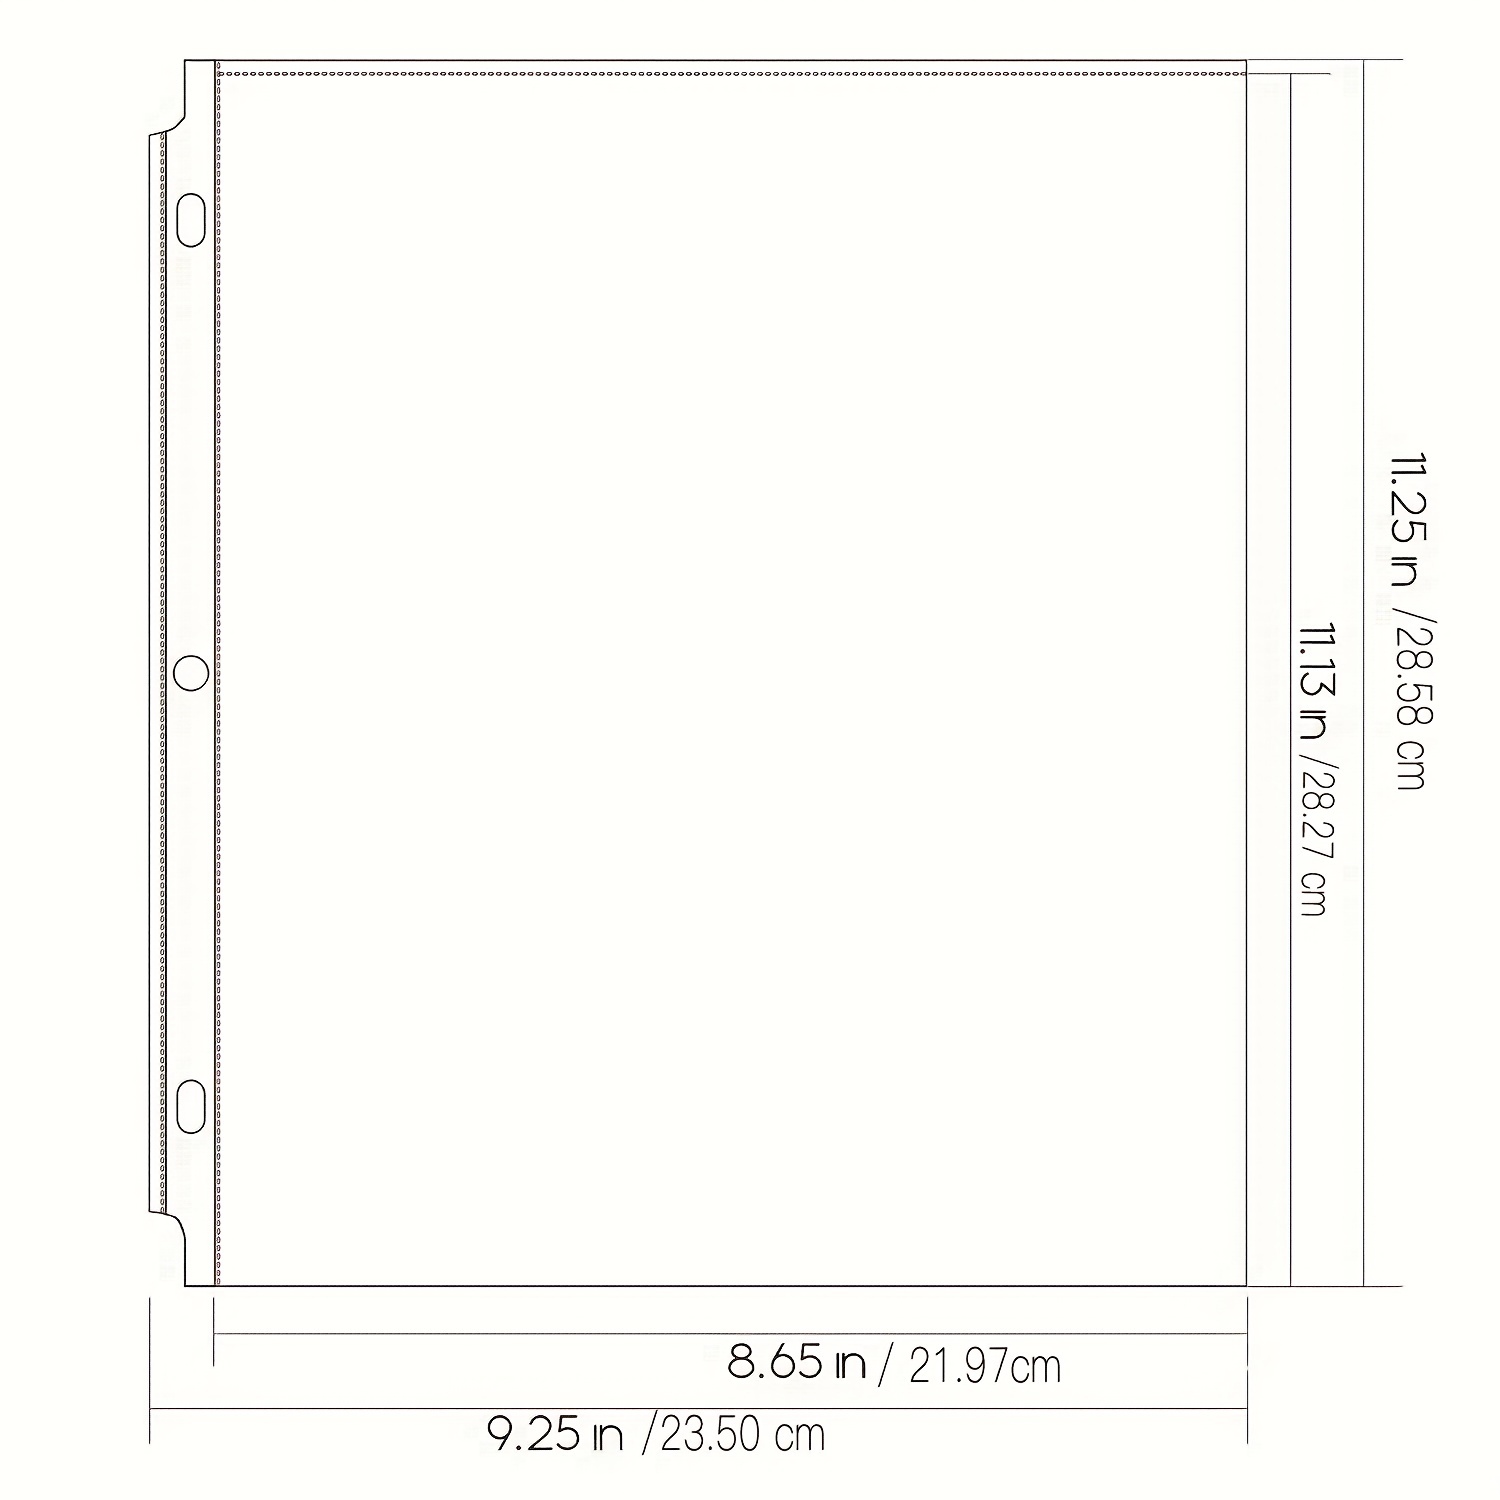 Letter Size Sheet Protectors 8.5x11 for Binder Organizing